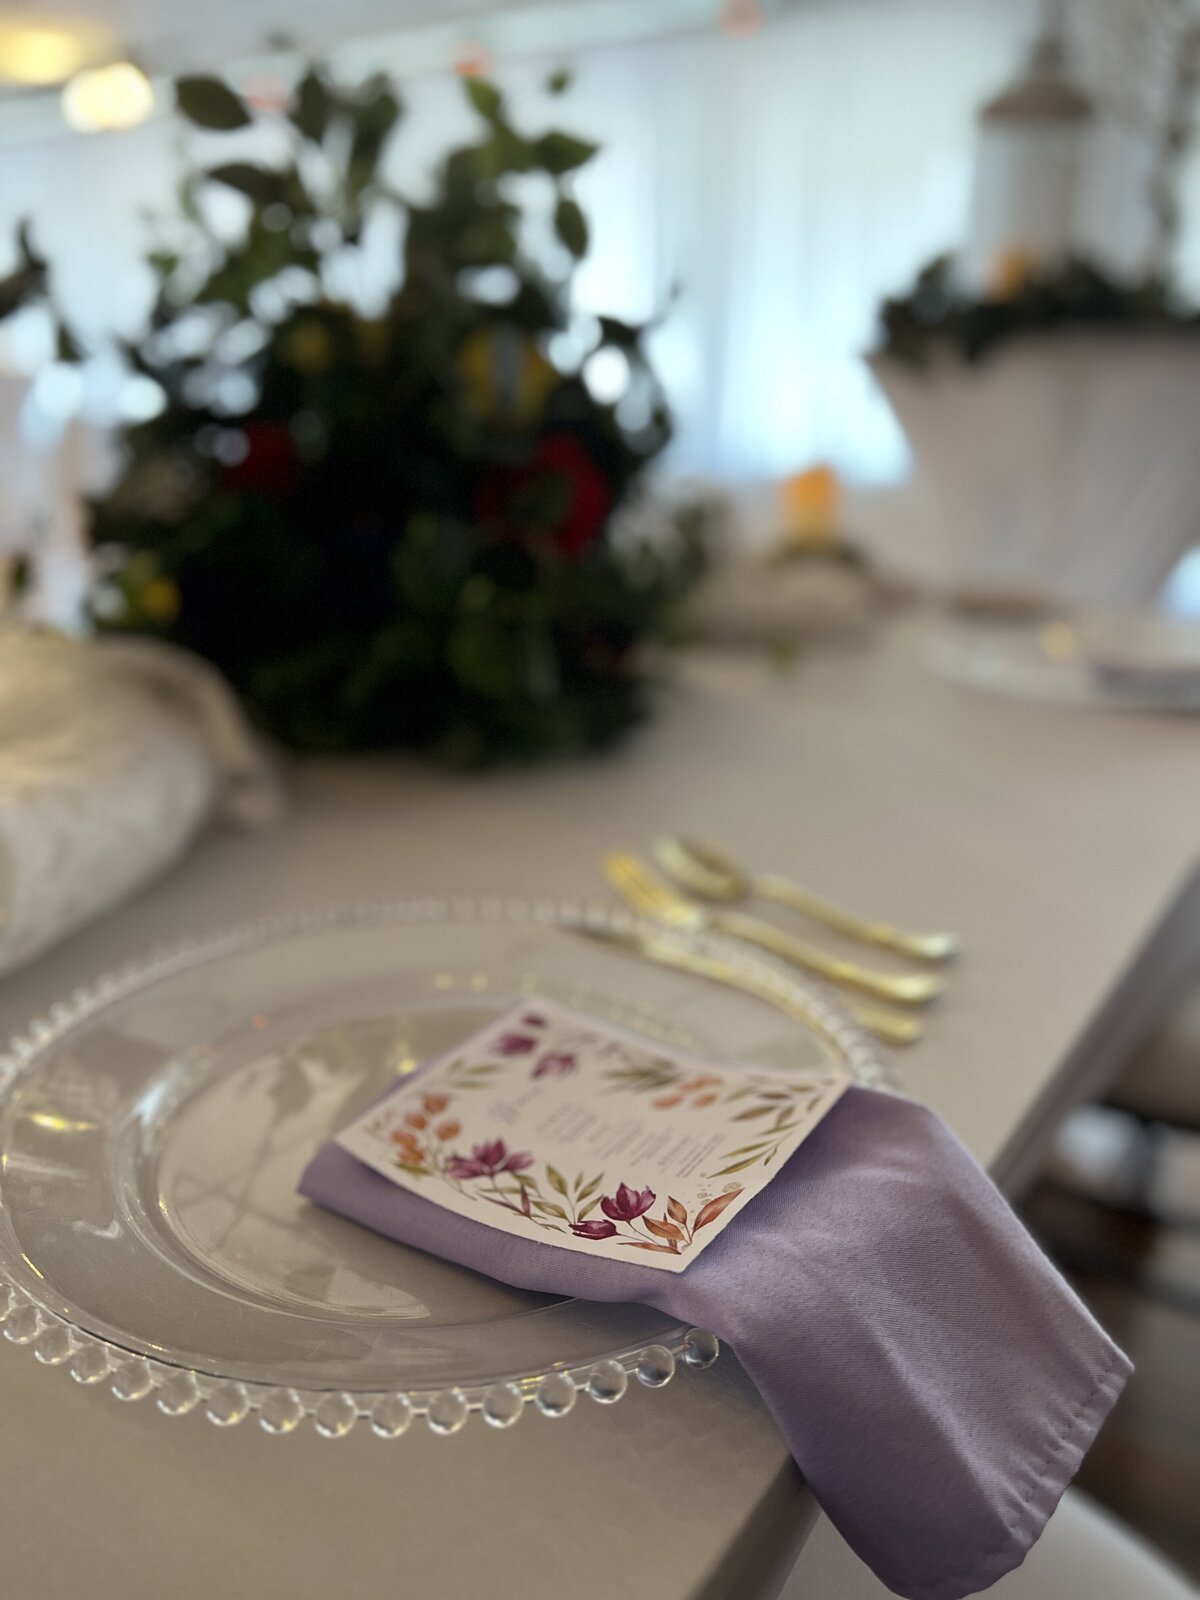 Wedding reception dinner plate and menu in our Clearwater event venue inclusive decor packages - Featuring classic clear charger plates and whimsical flowers for an enchanting dining experience